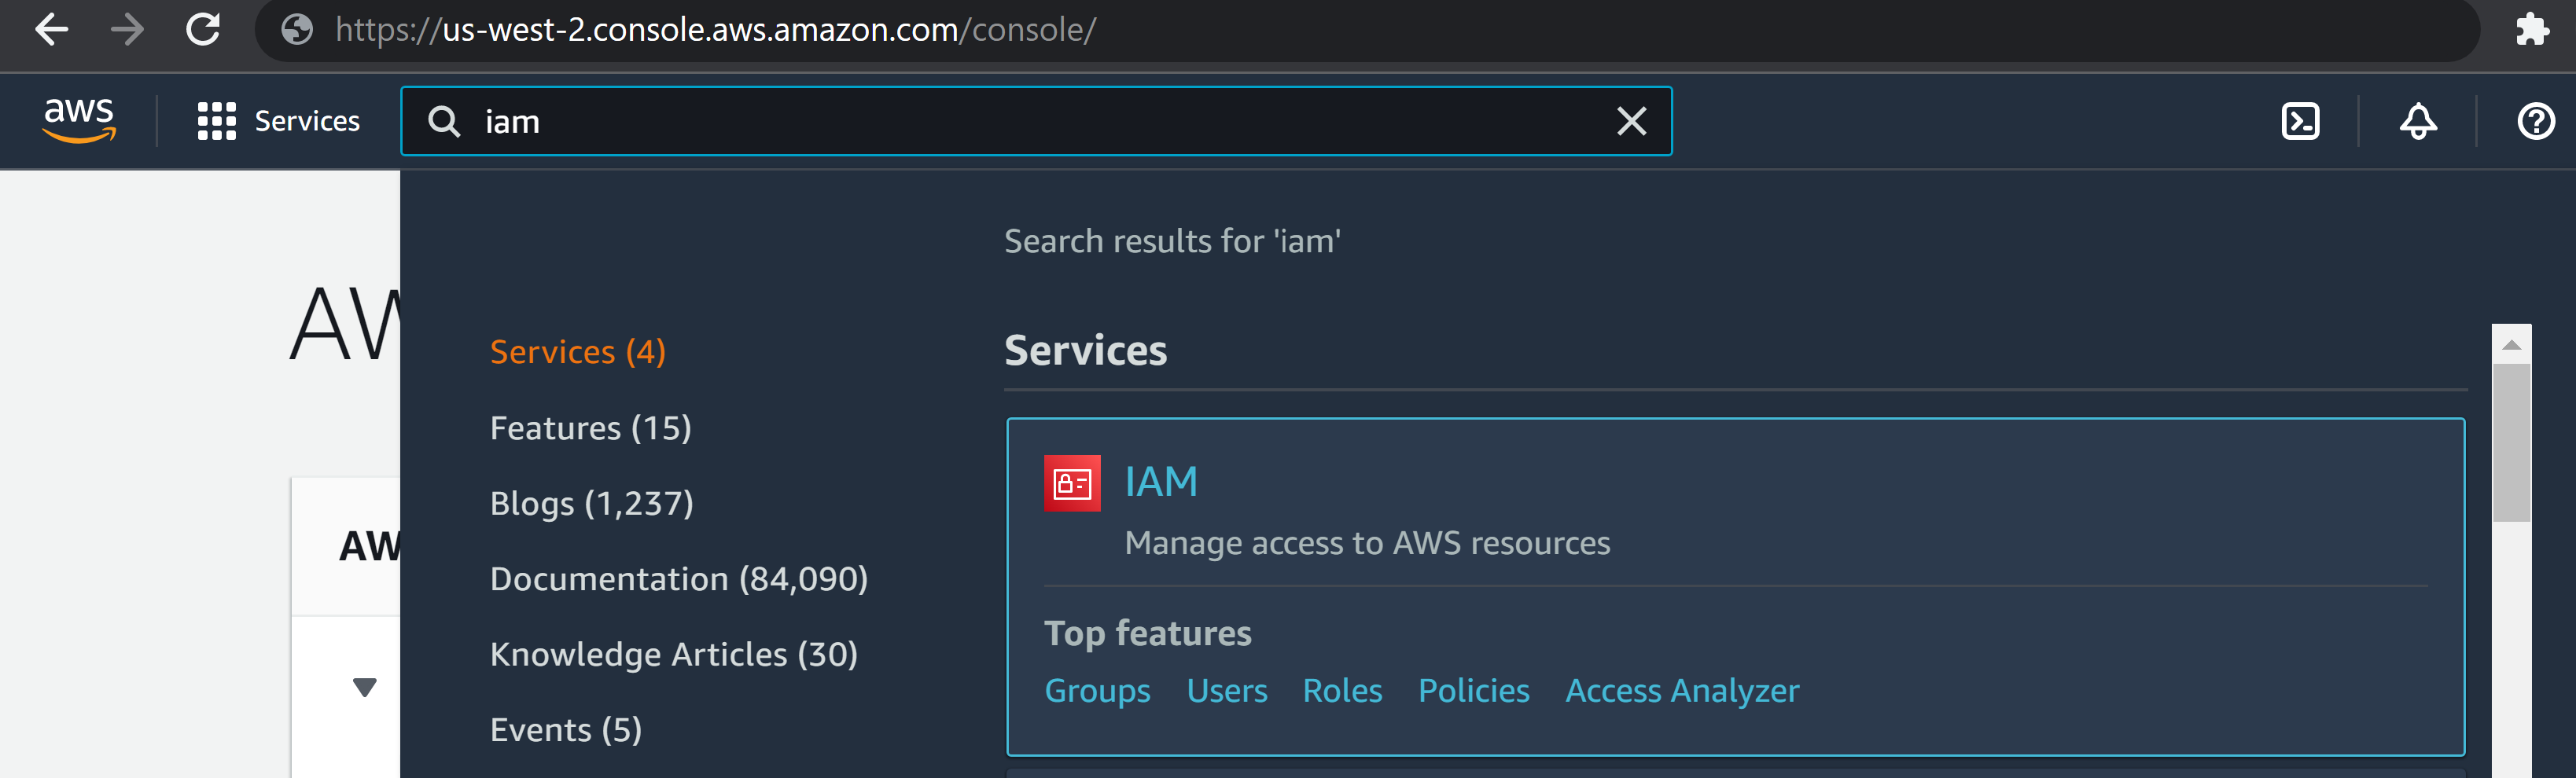 Searching for IAM page on the AWS console